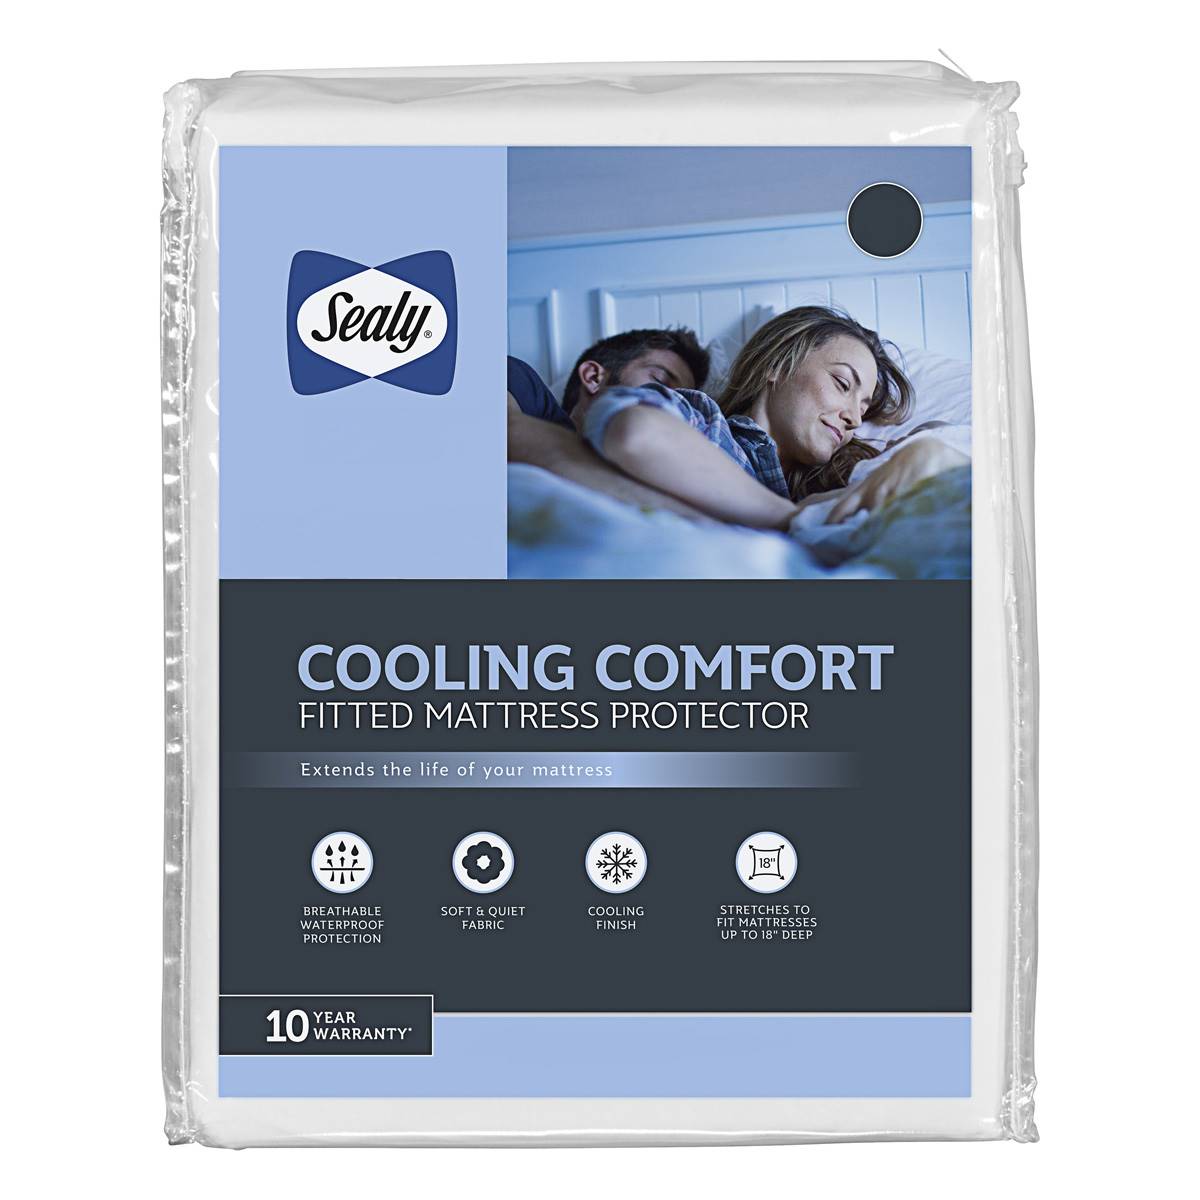 Sealy(R) Cool Comfort Mattress Protector